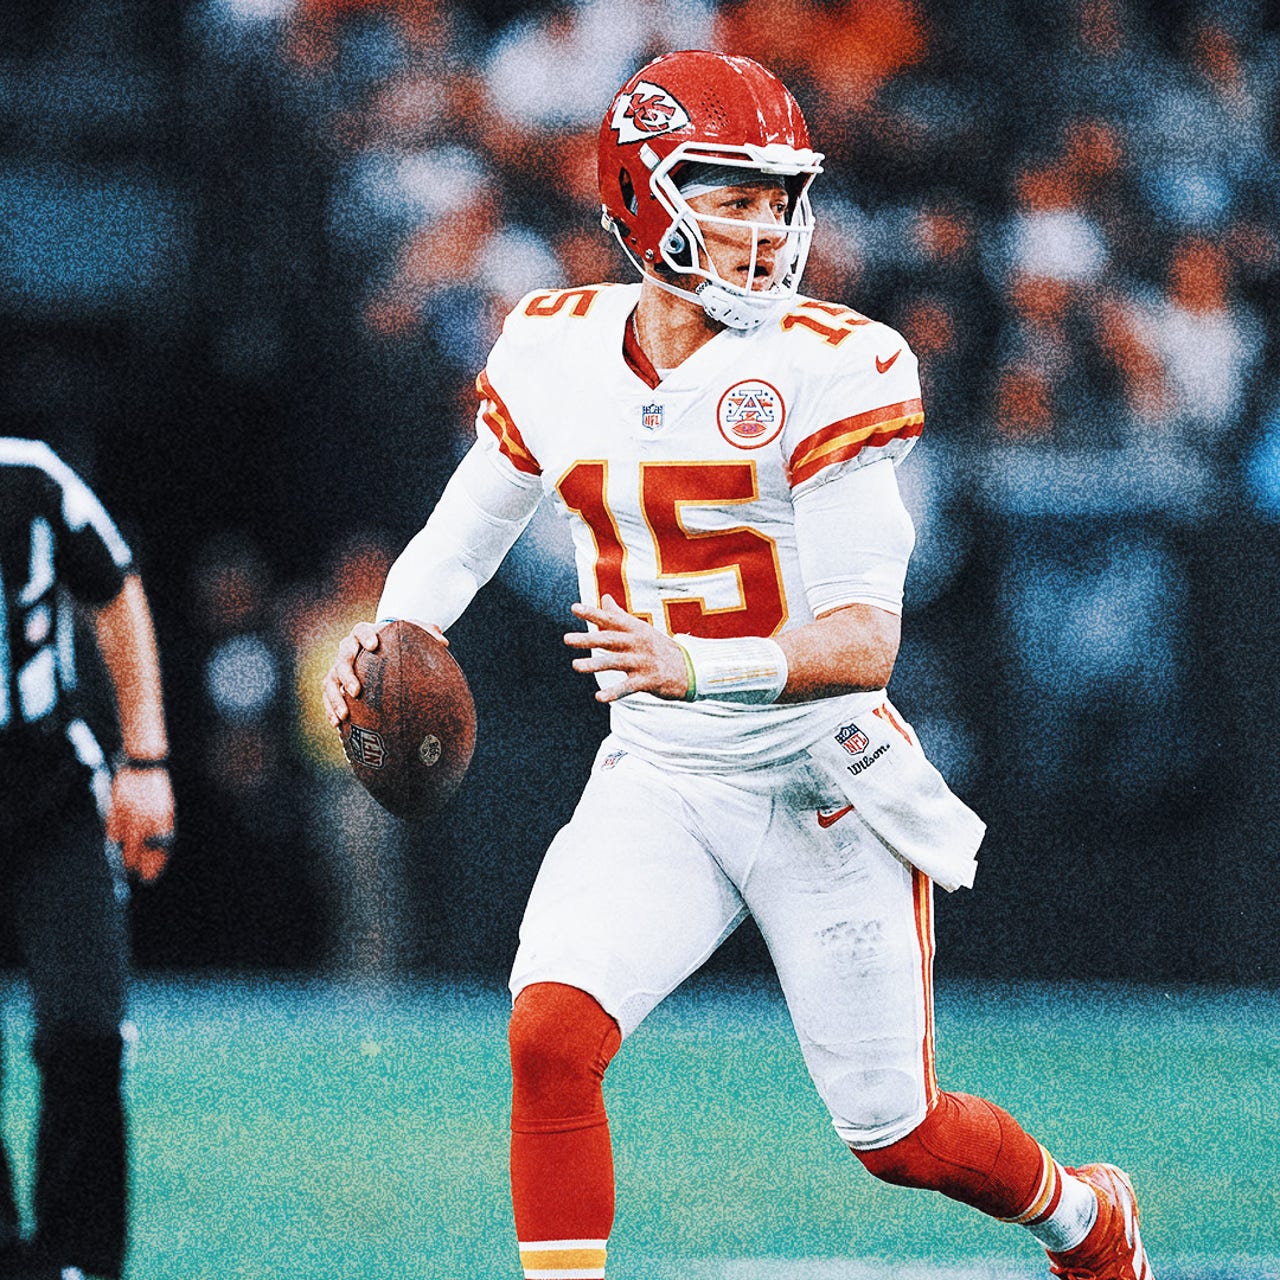 Chiefs Kick off Week 18 Playing for AFC's No. 1 Seed